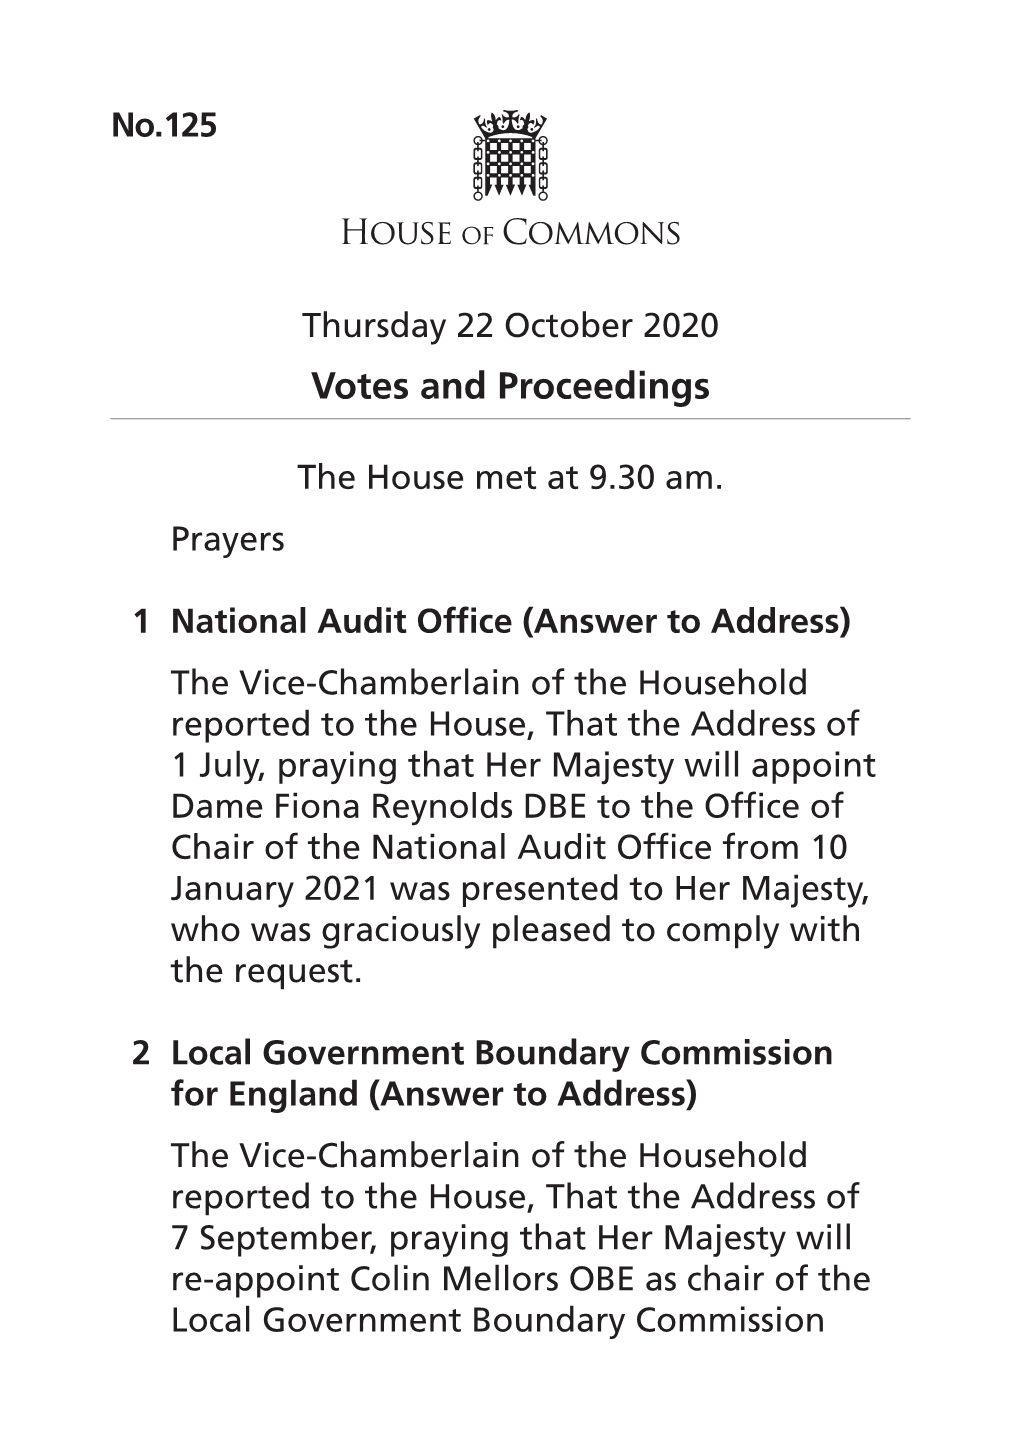 Votes and Proceedings for 22 Oct 2020